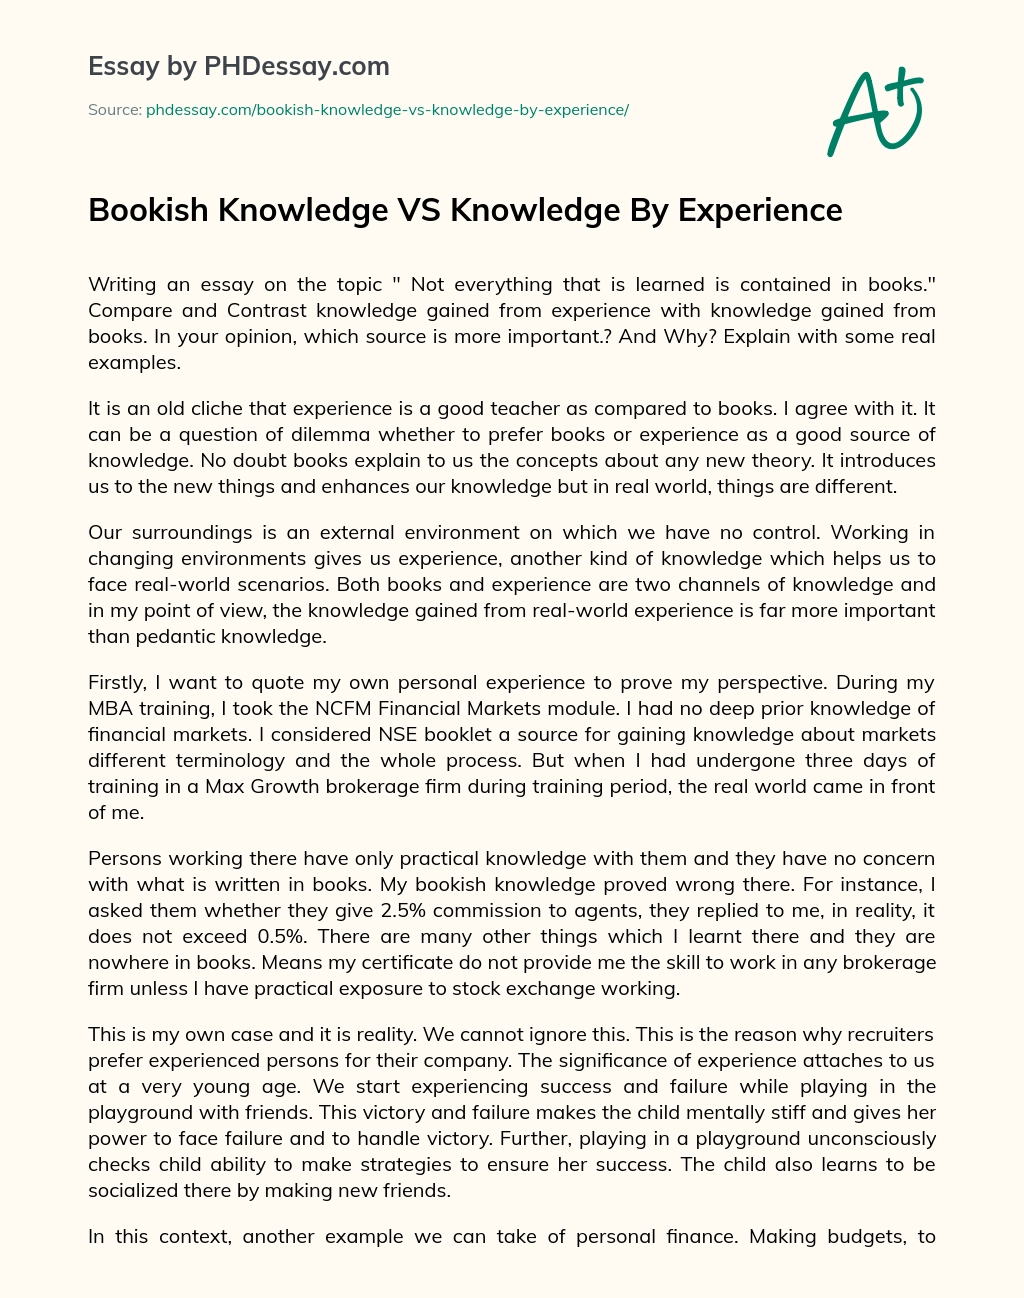 Bookish Knowledge VS Knowledge By Experience essay